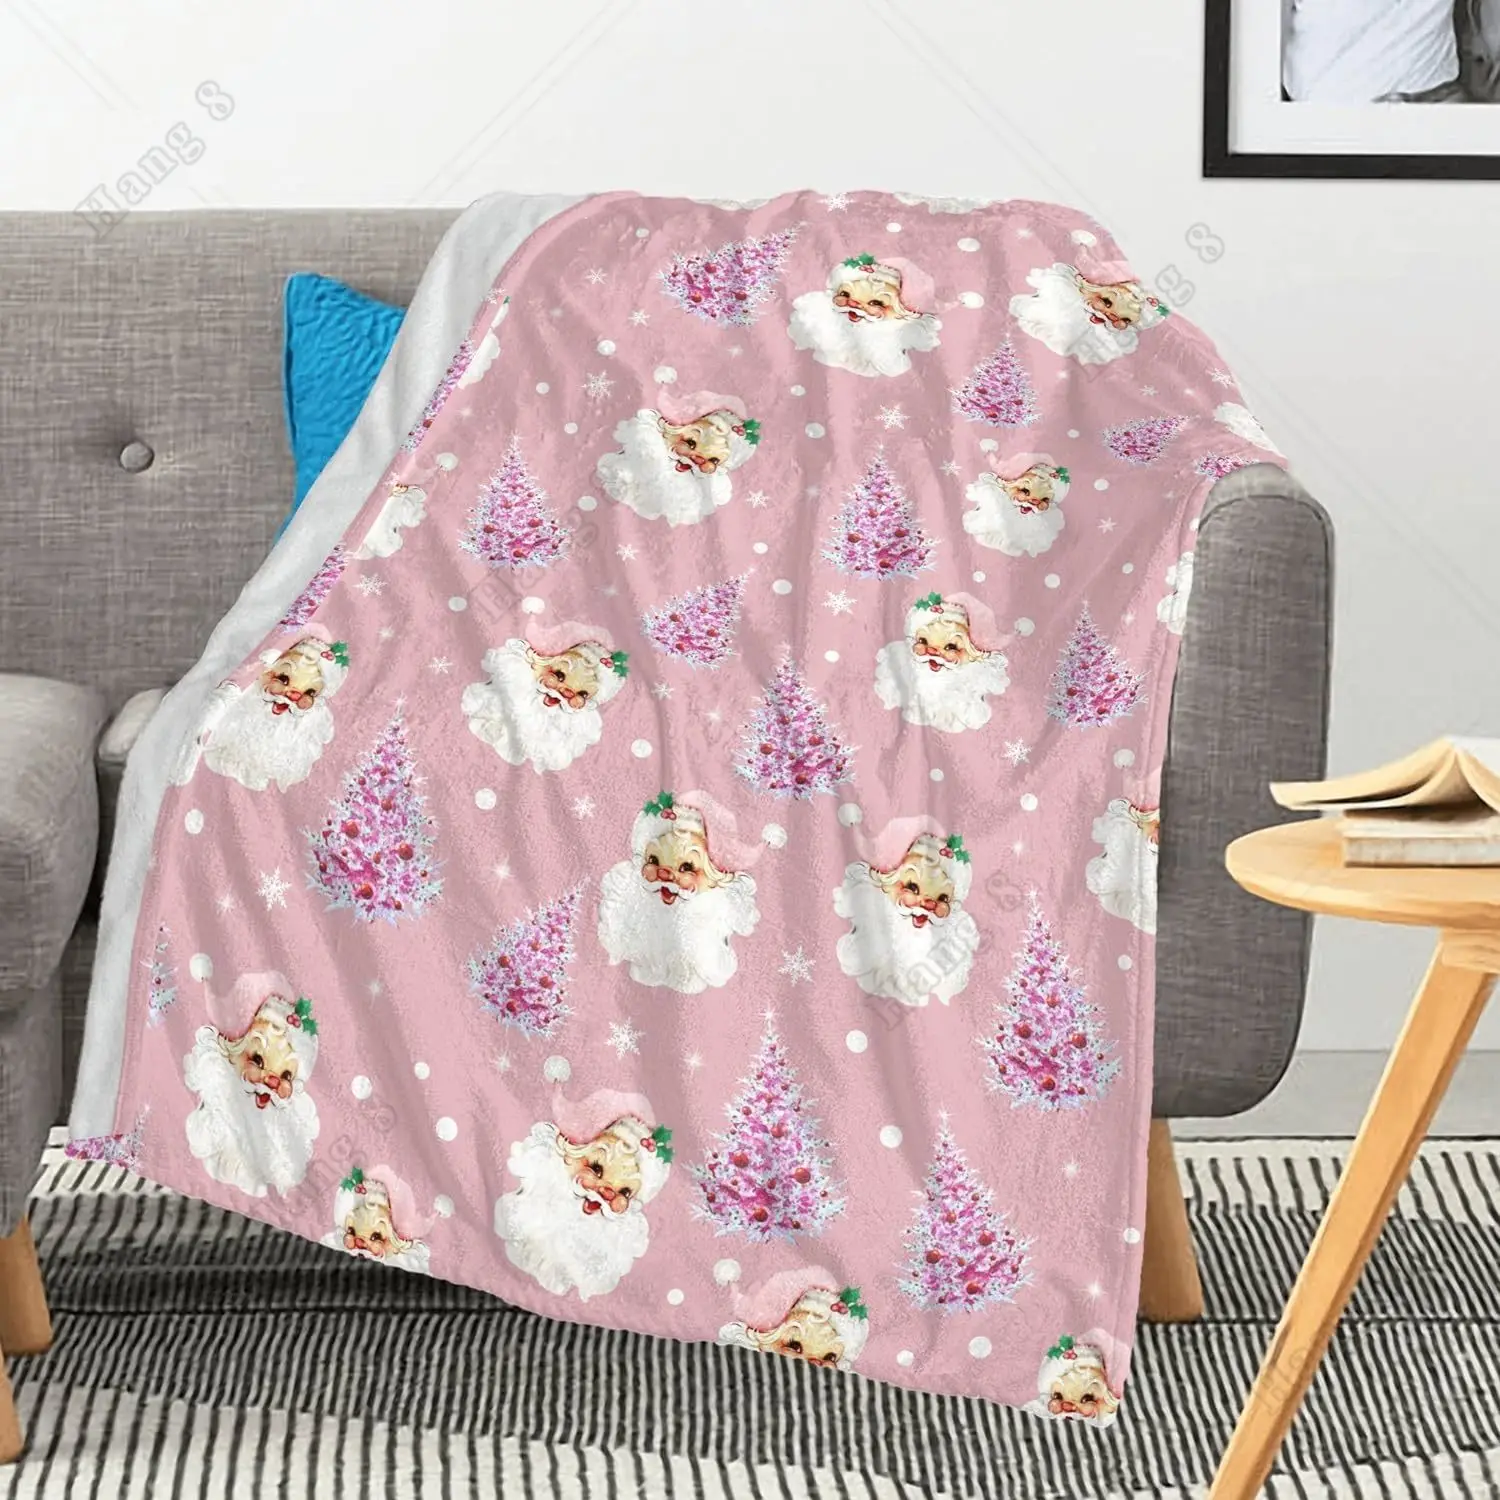 

Cute Santa Claus Pink Christmas Tree Snowflake Warm Throw Blanket for Couch, Seasonal Winter Xmas Holiday Blanket for Couch